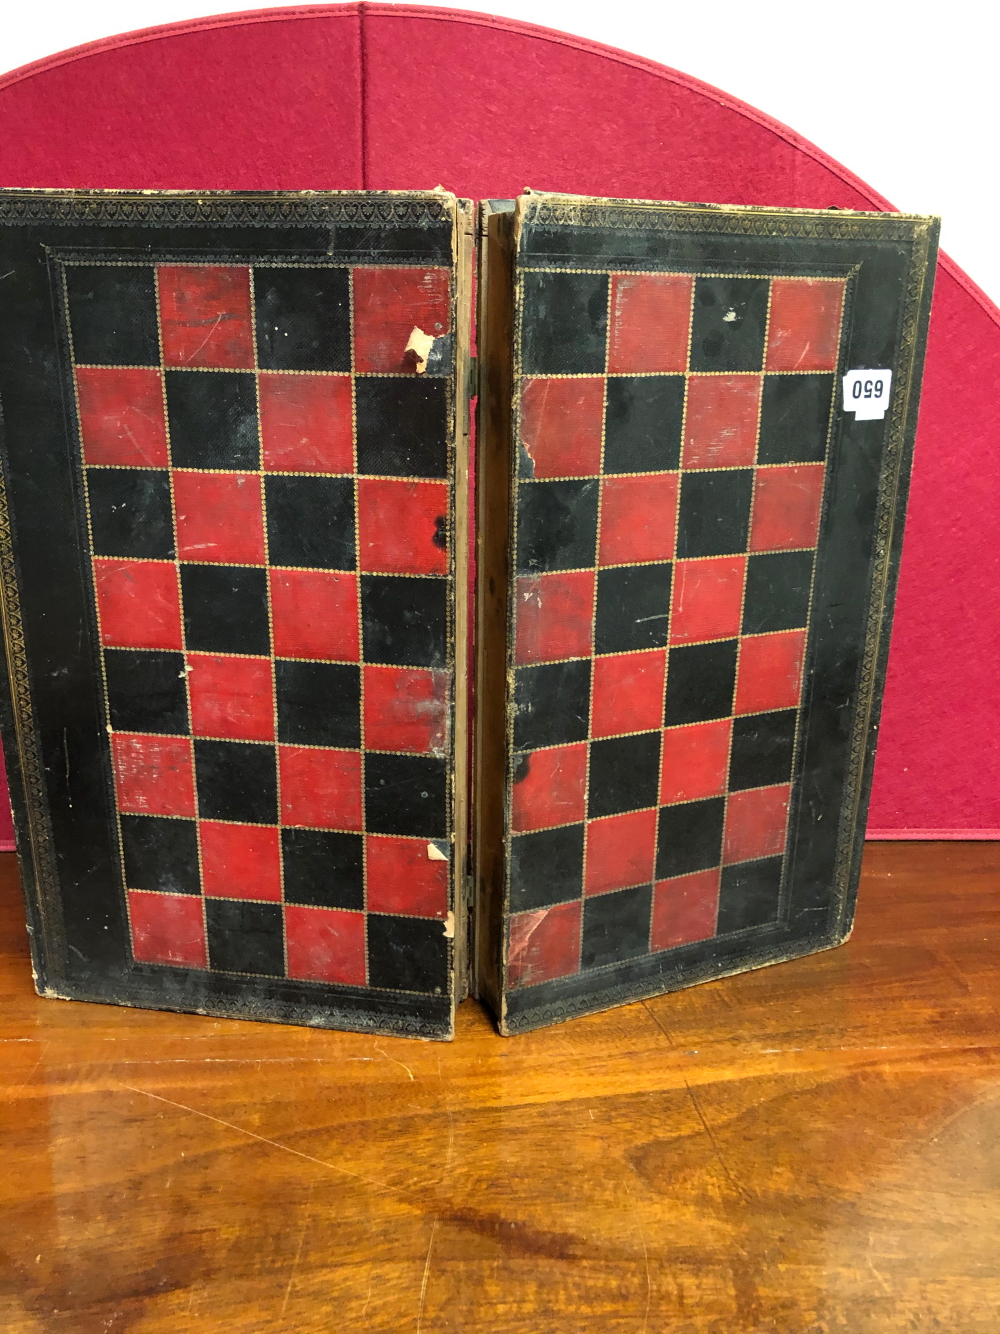 A RED, BLACK AND GILT LEATHER MOUNTED CHESS BOARD DISGUISED AS TWO VOLUMES ON THE HISTORY OF ENGLAND - Image 8 of 11